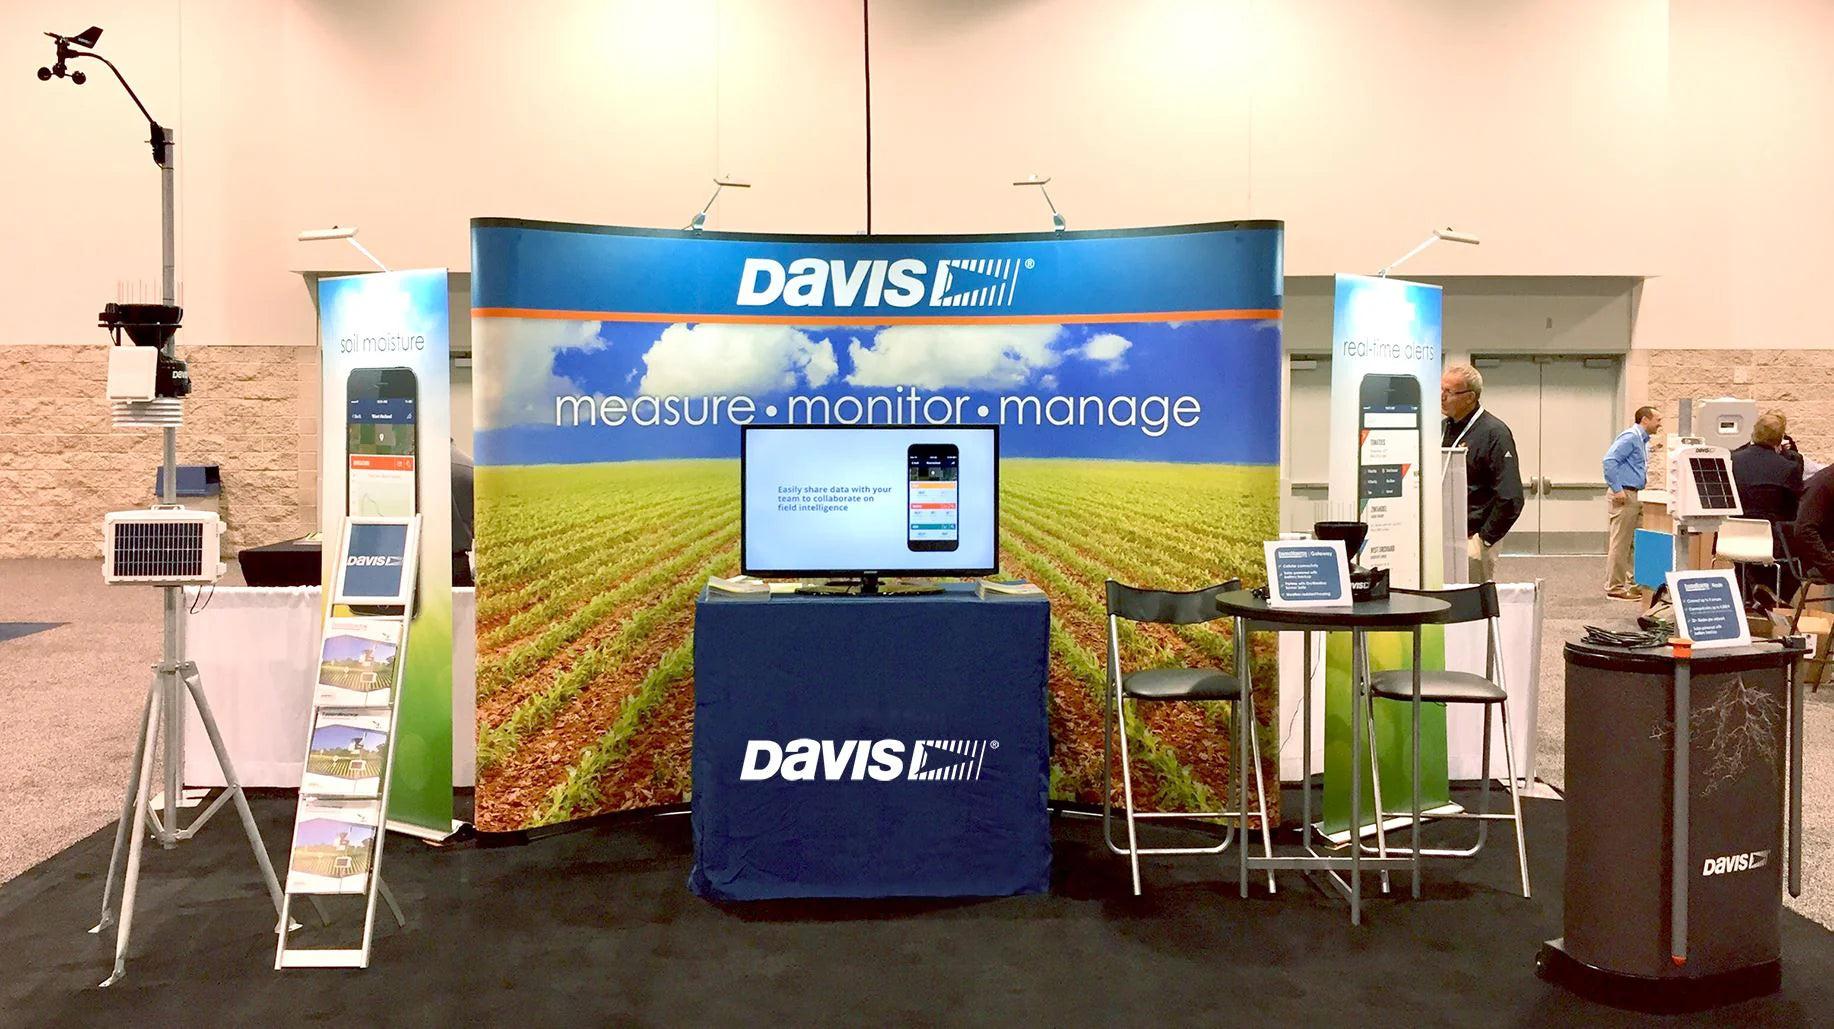 An innovative and engaging Davis trade show booth